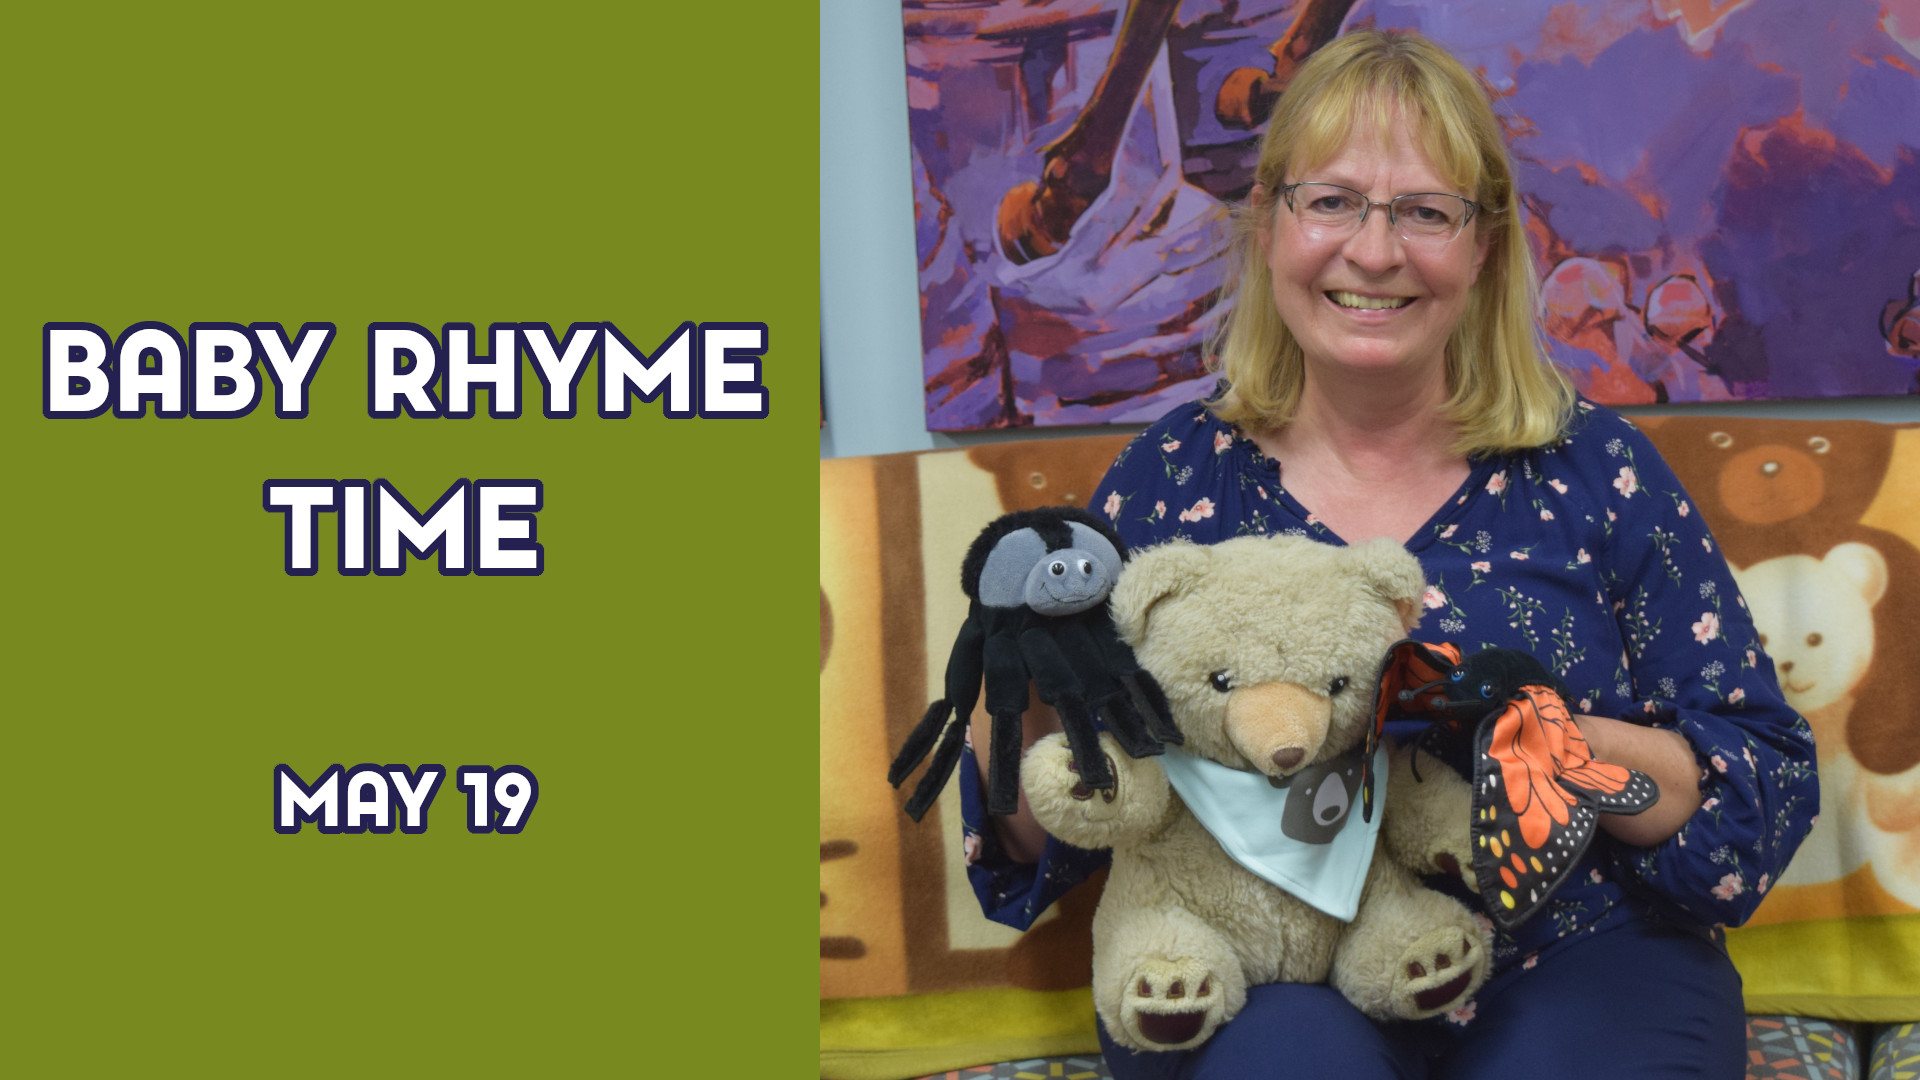 A woman holds stuffed animals next to the text "Baby Rhyme Time May 19"